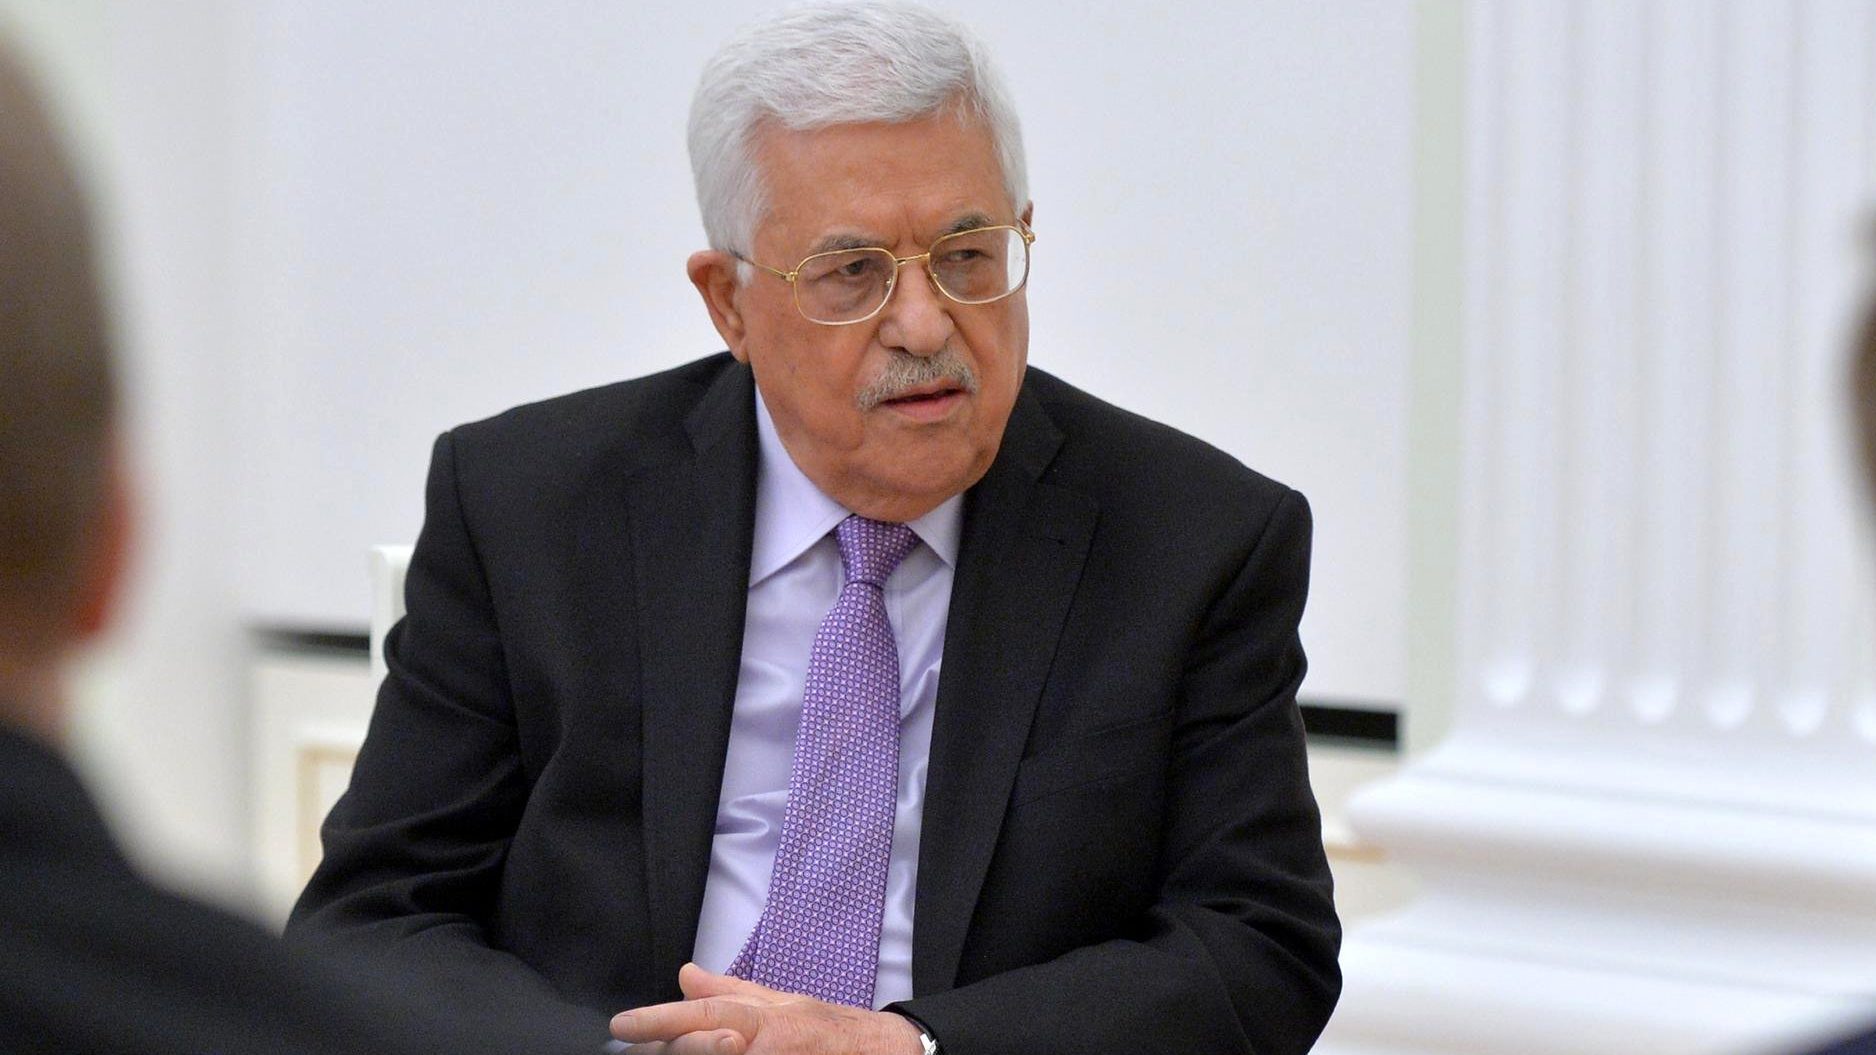 Abbas Rejects Israeli Efforts to Stop Palestinian Elections